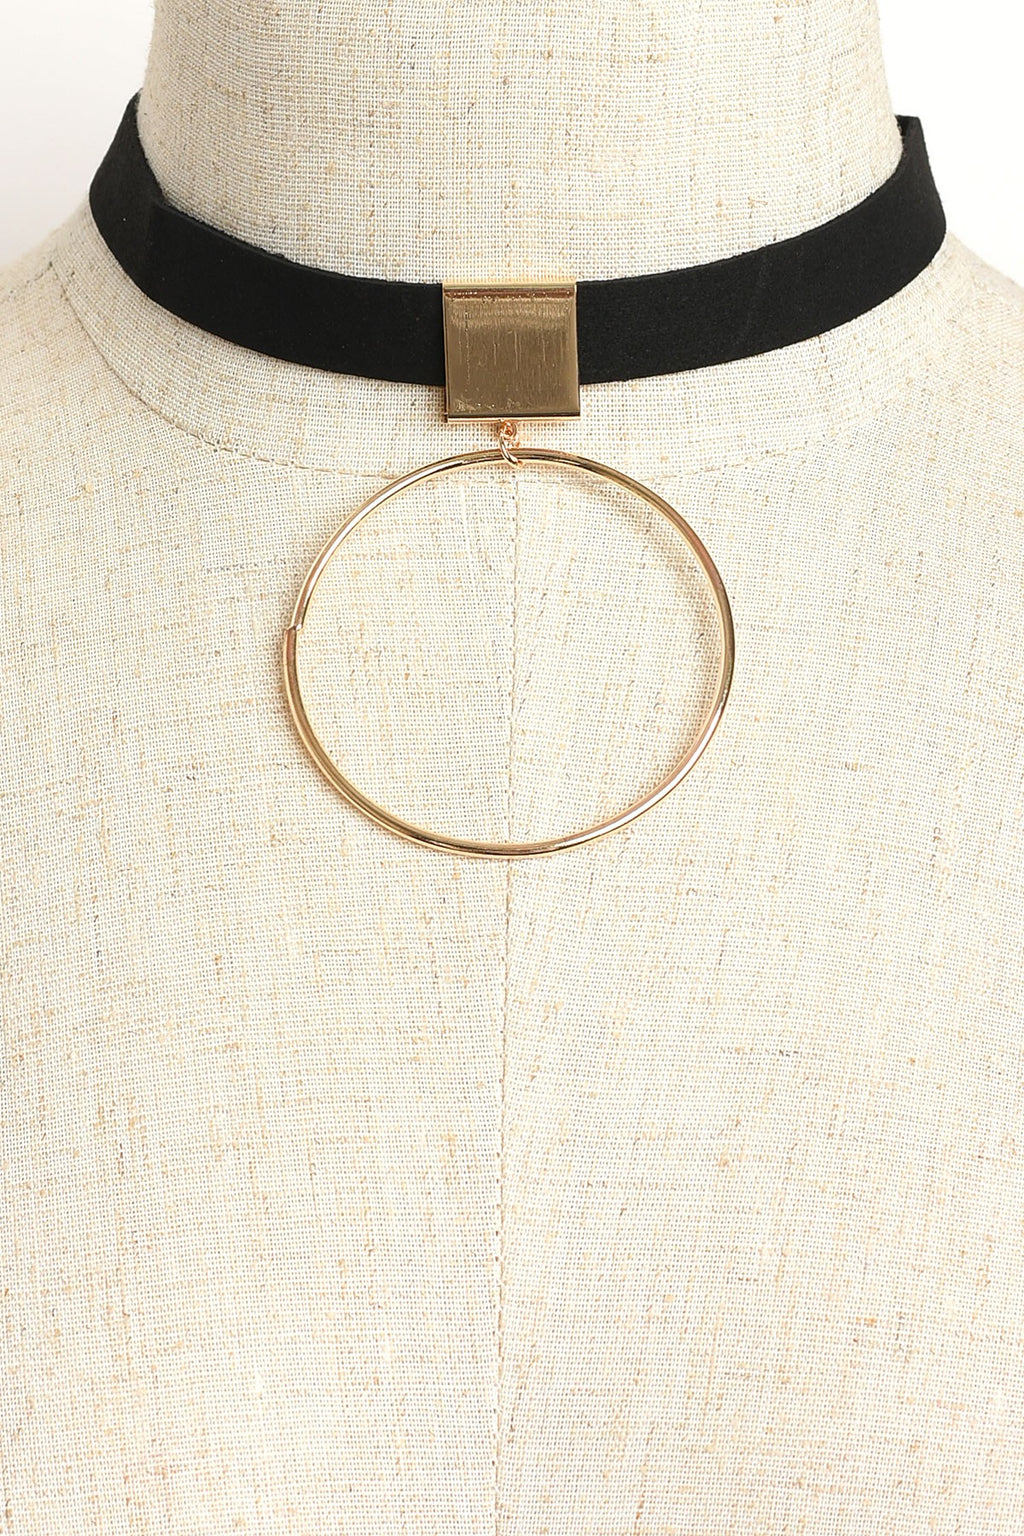 Black Choker Necklace with Gold Hoop